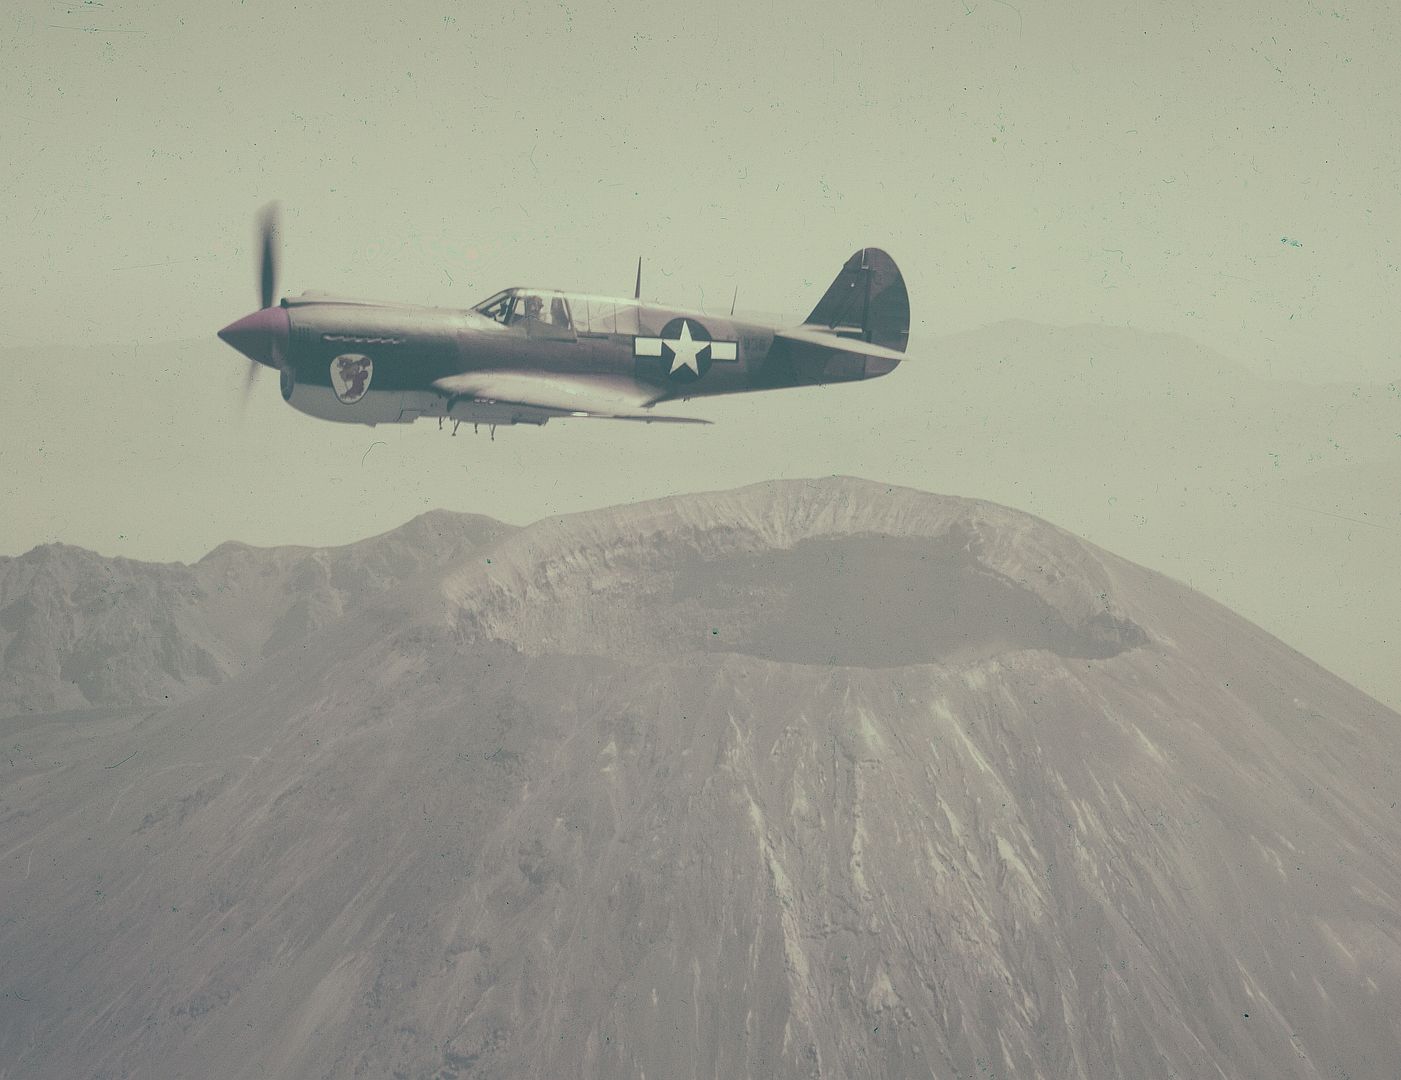 40 Warhawk Over Volcano In Italy